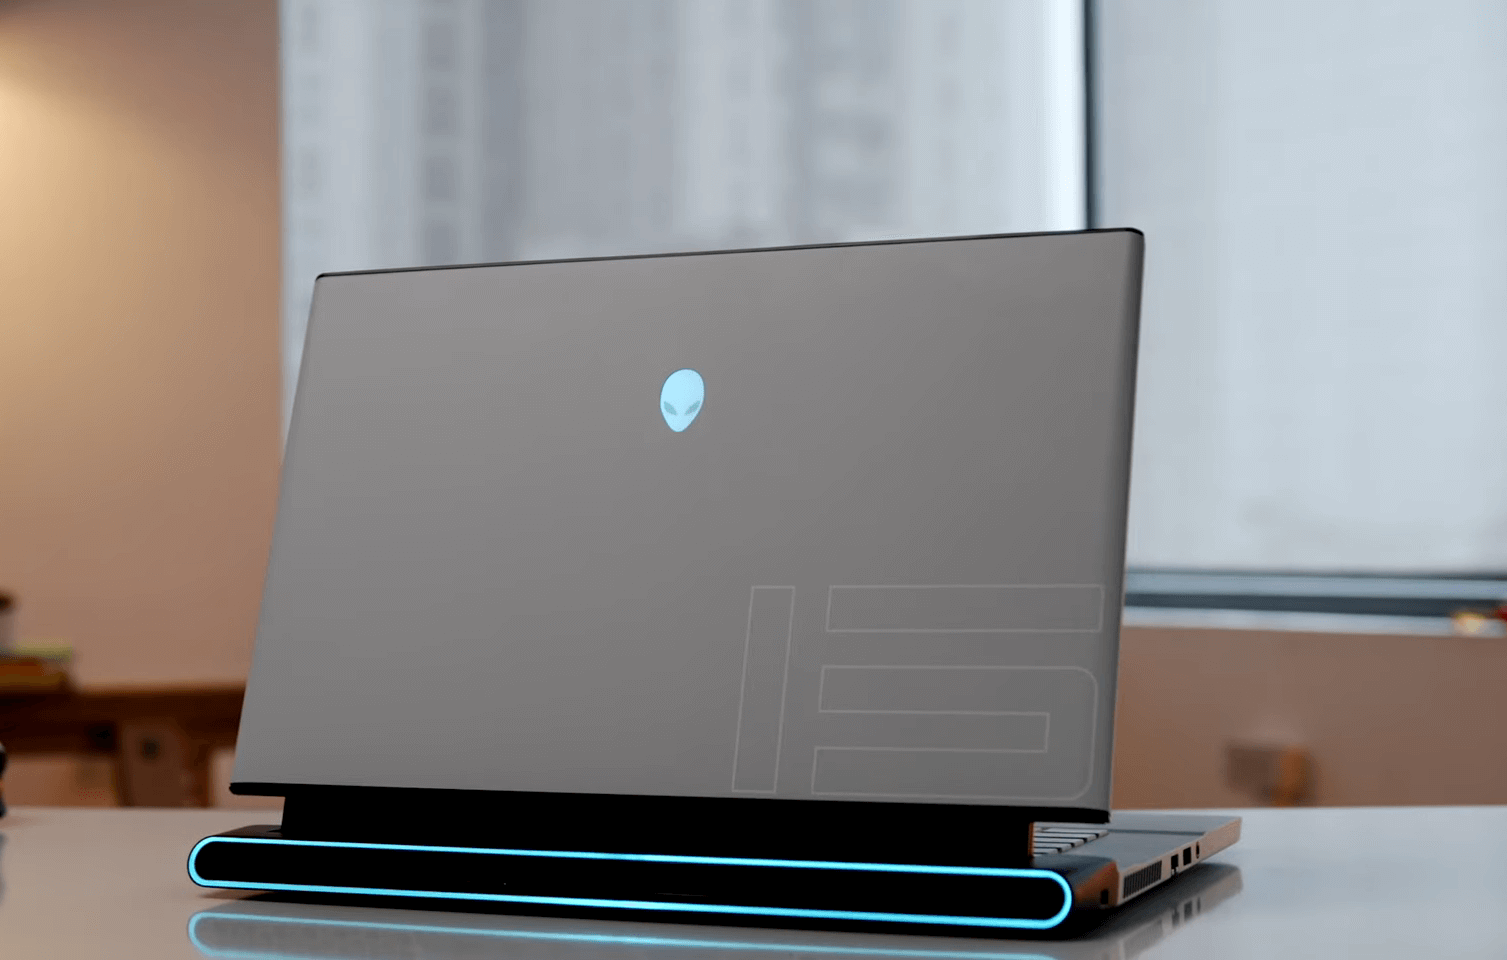 Dell Alienware M15 R3 vs Area 51M R2: which One Should You Buy for Gaming?